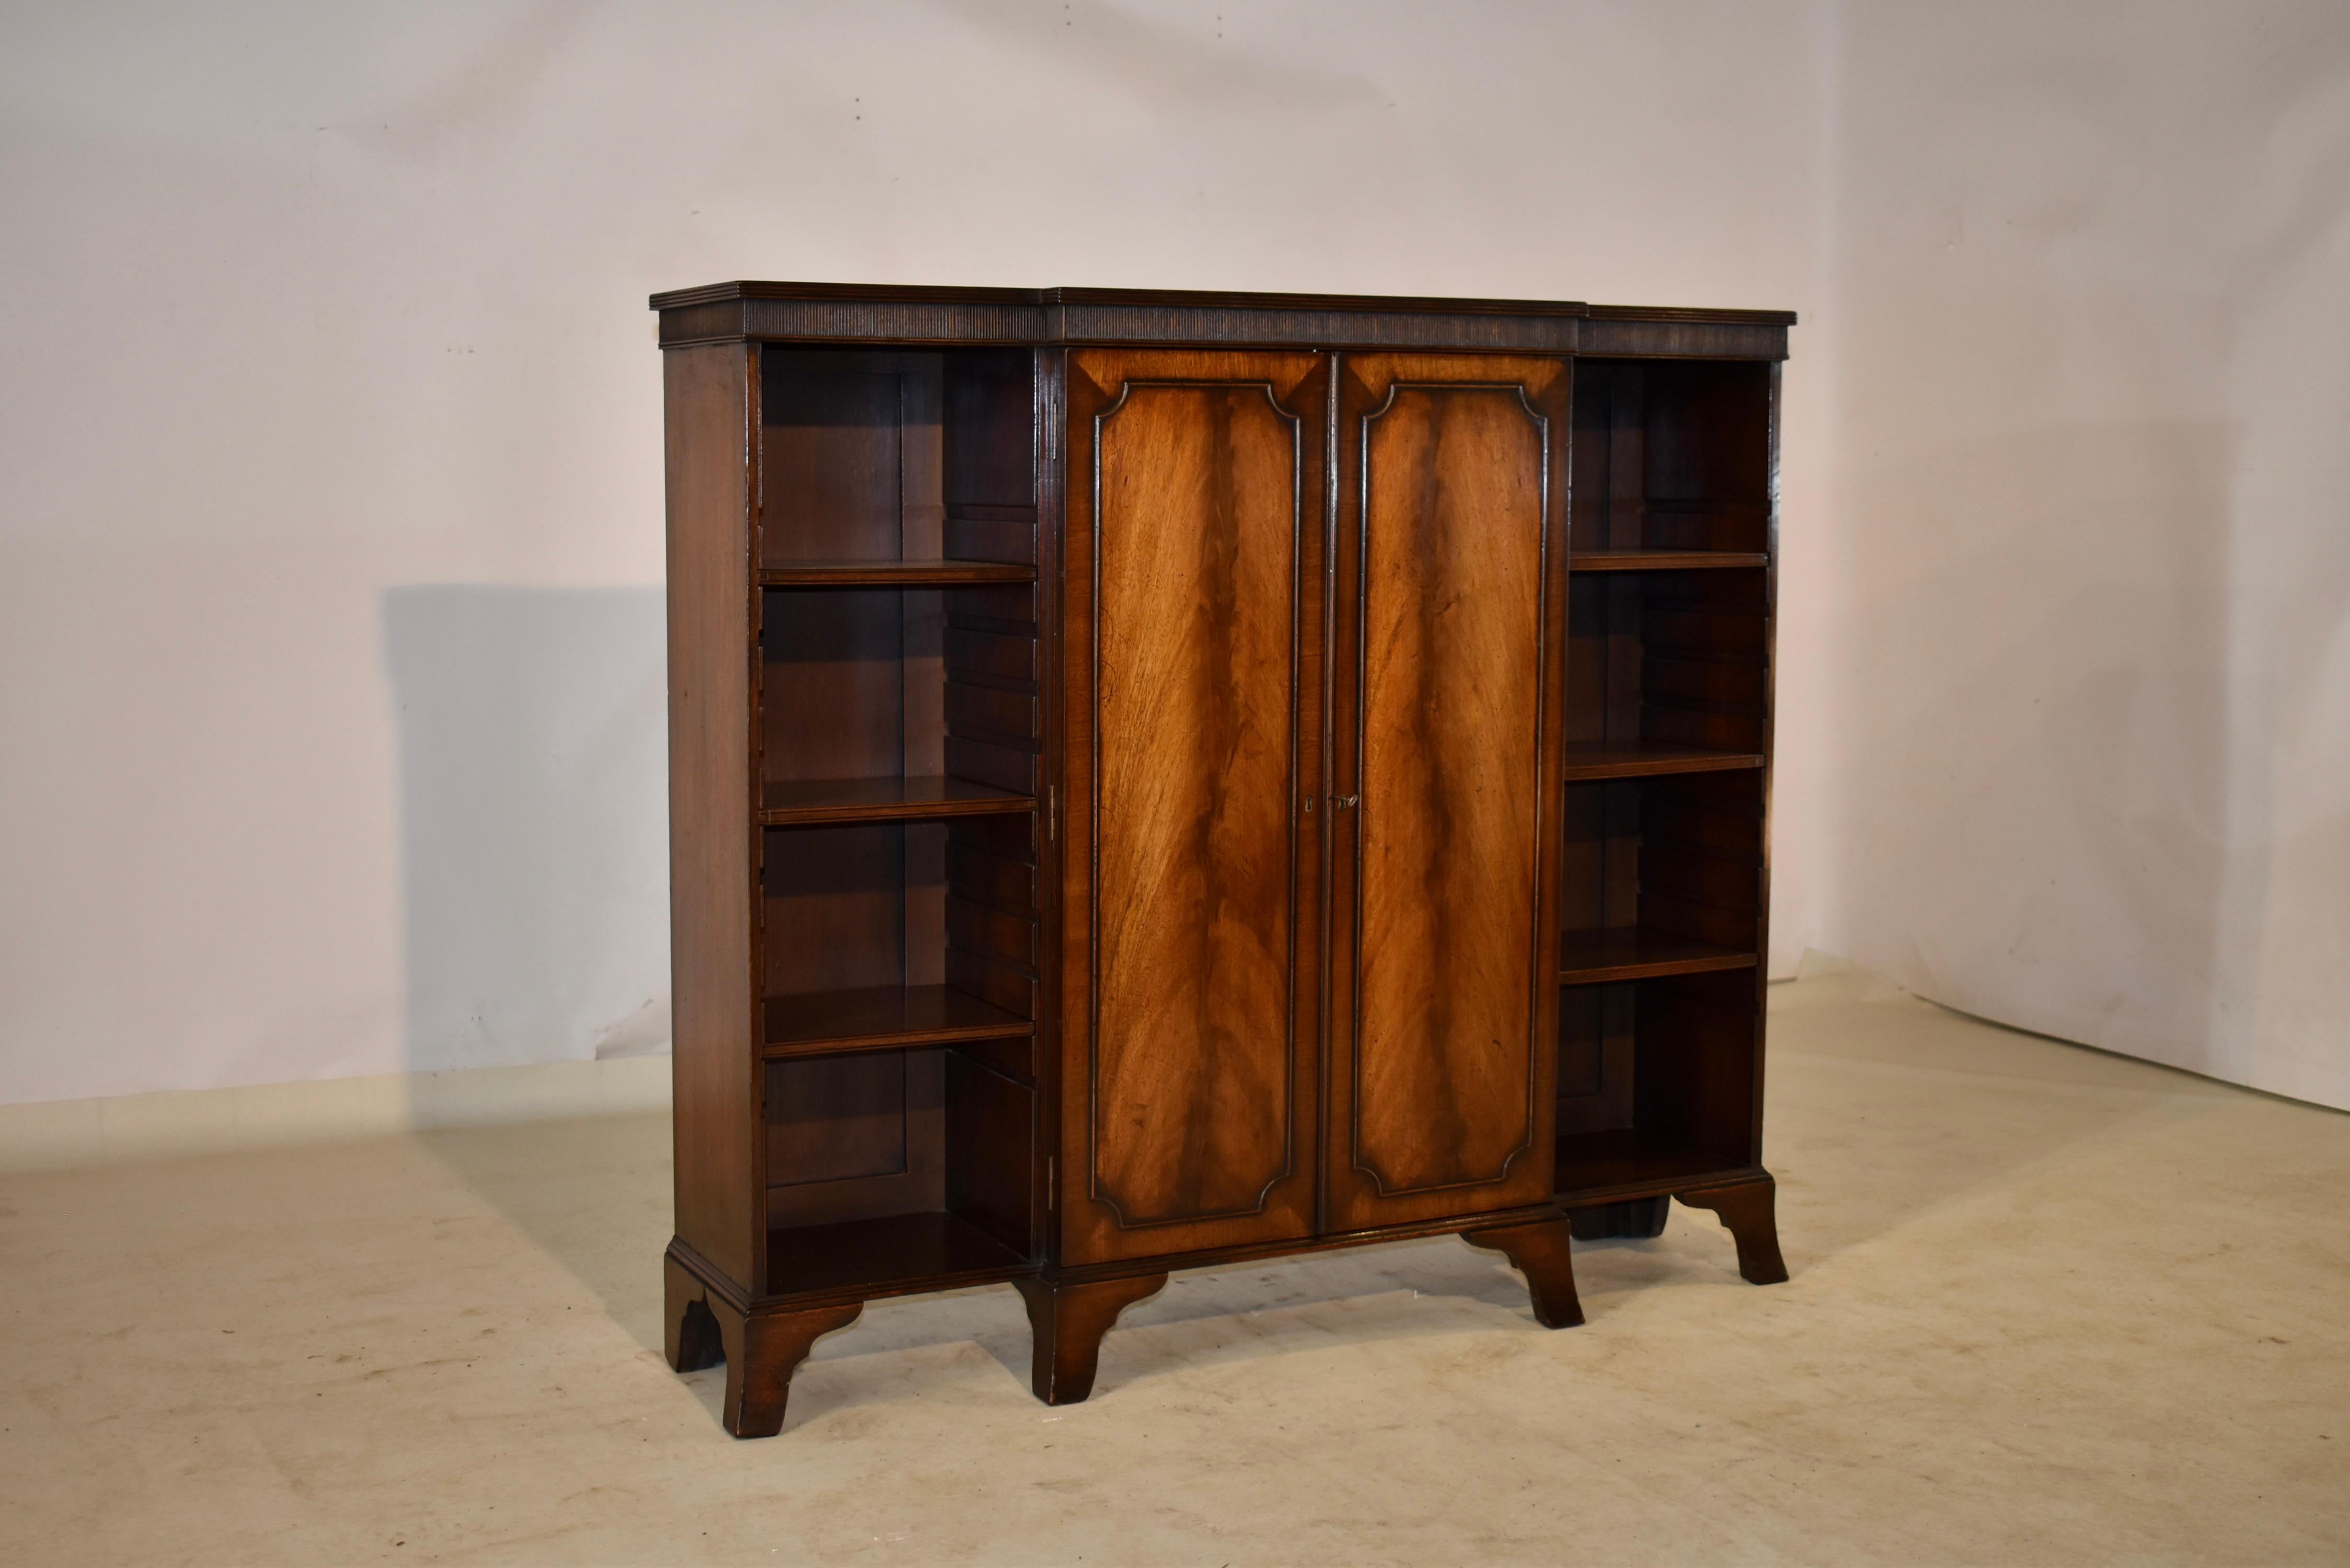 Edwardian mahogany breakfront bookcase from England which has two wonderfully grained doors made from finely figured mahogany with applied moldings. the top of the bookcase has a reeded edge and a reeded plinth beneath it for added decorative